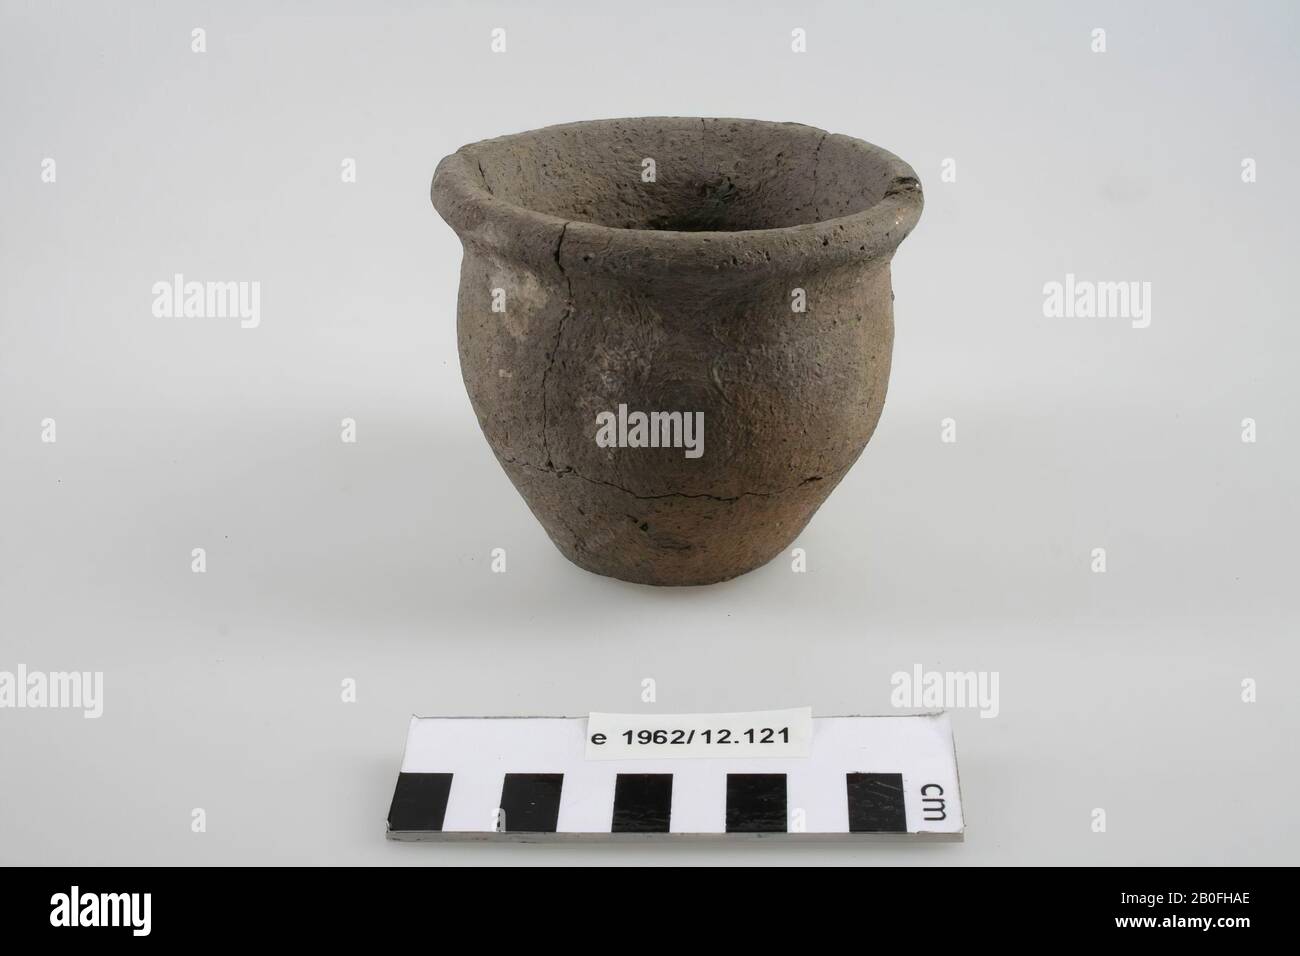 Rough-walled pot of imported turntable pottery. Some long vertical and horizontal cracks. Old glueing, urn, earthenware (Frankish), h: 8.5 cm, diam: 10.2 cm, vmeb, The Netherlands, Gelderland, Wageningen, Wageningen Stock Photo